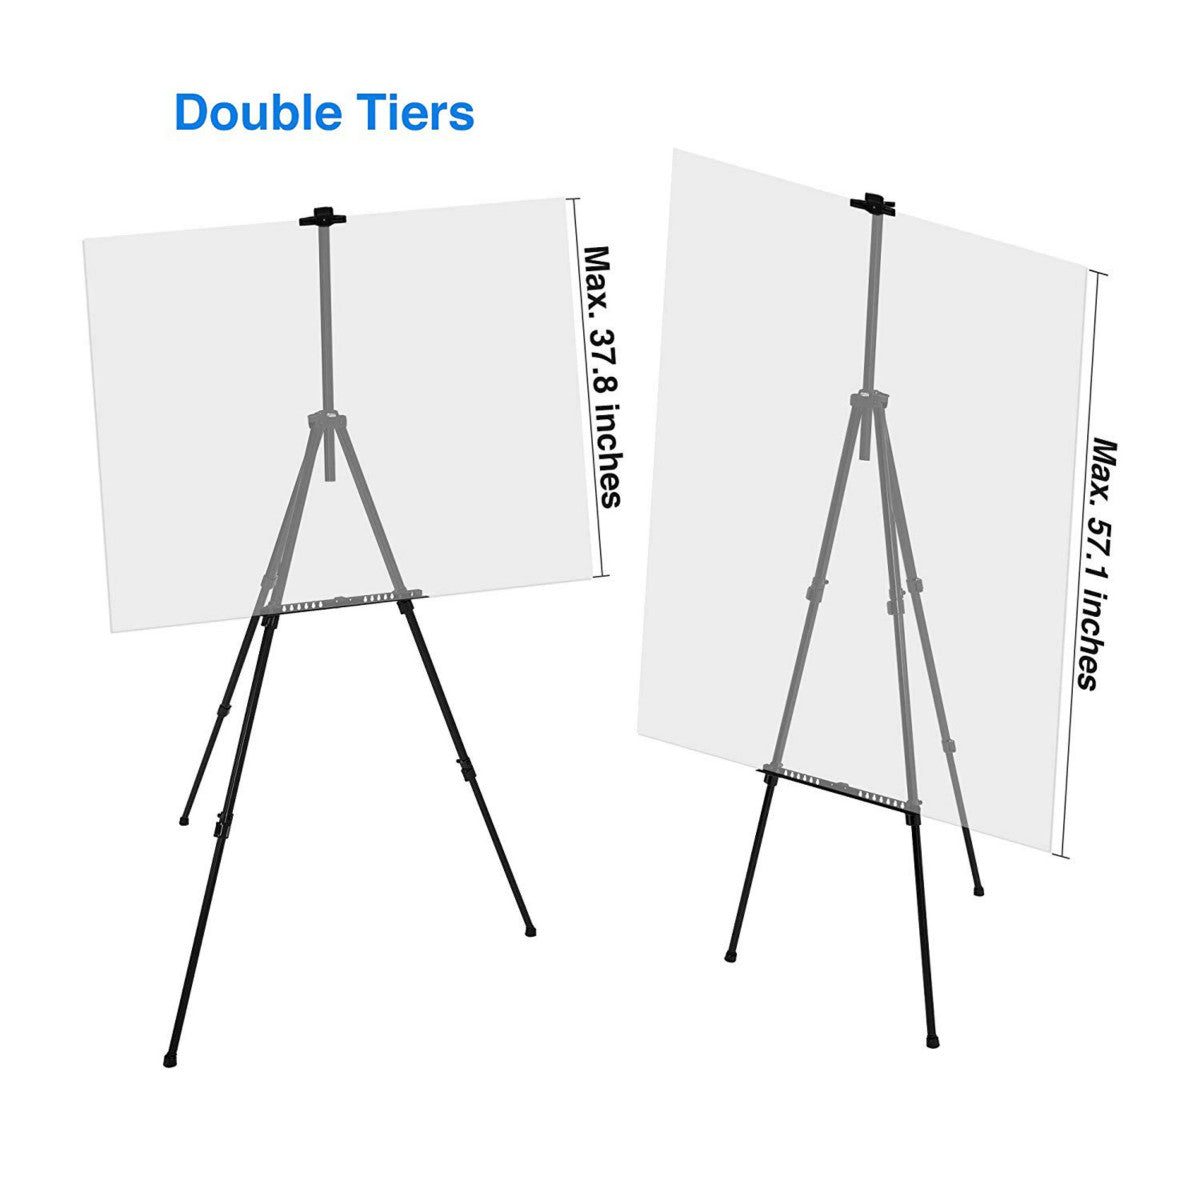 Artify Art Supplies Artify 66 Inches Double Tier Easel Stand Adjustable Height from 22-66 Tripod for Painting and Display with A Carrying Bag Pack Bla